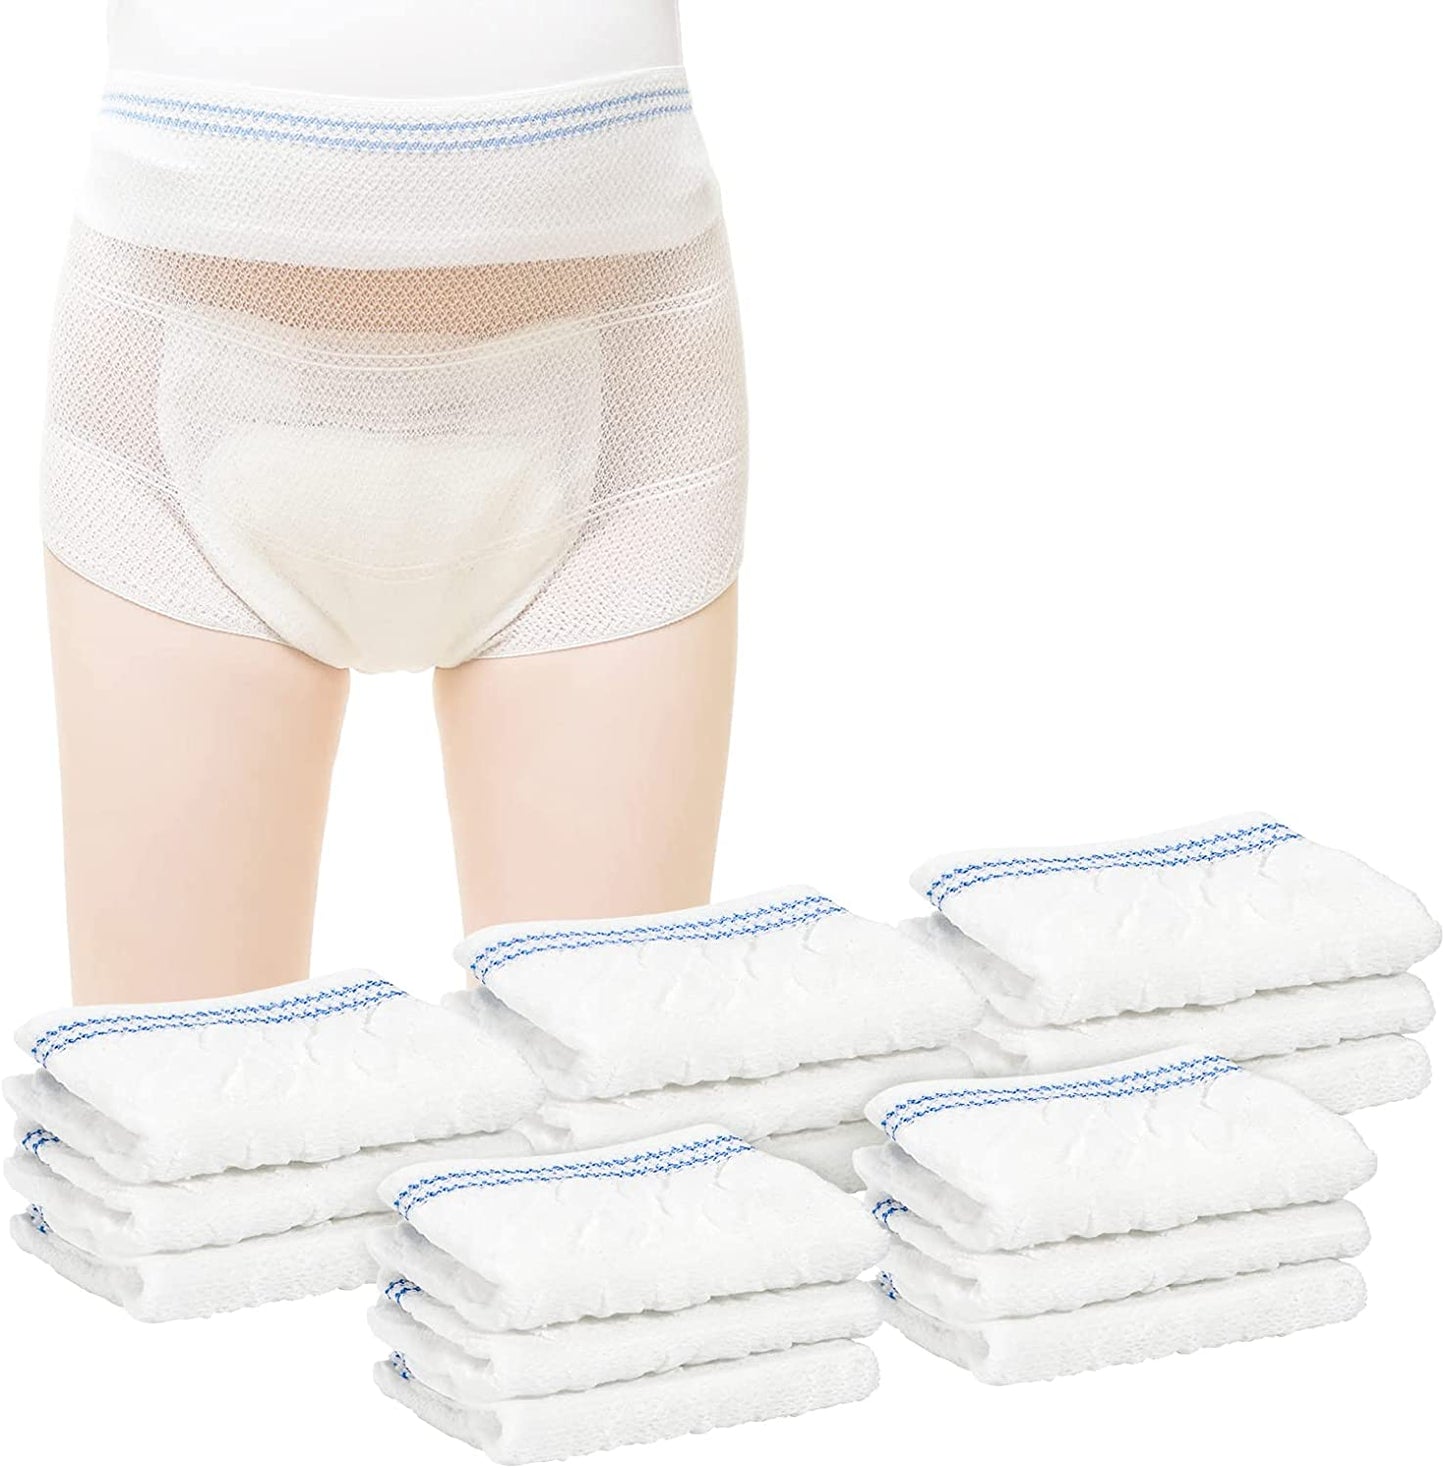 Disposable Mesh Underwear (5 Count) for Postpartum and Post